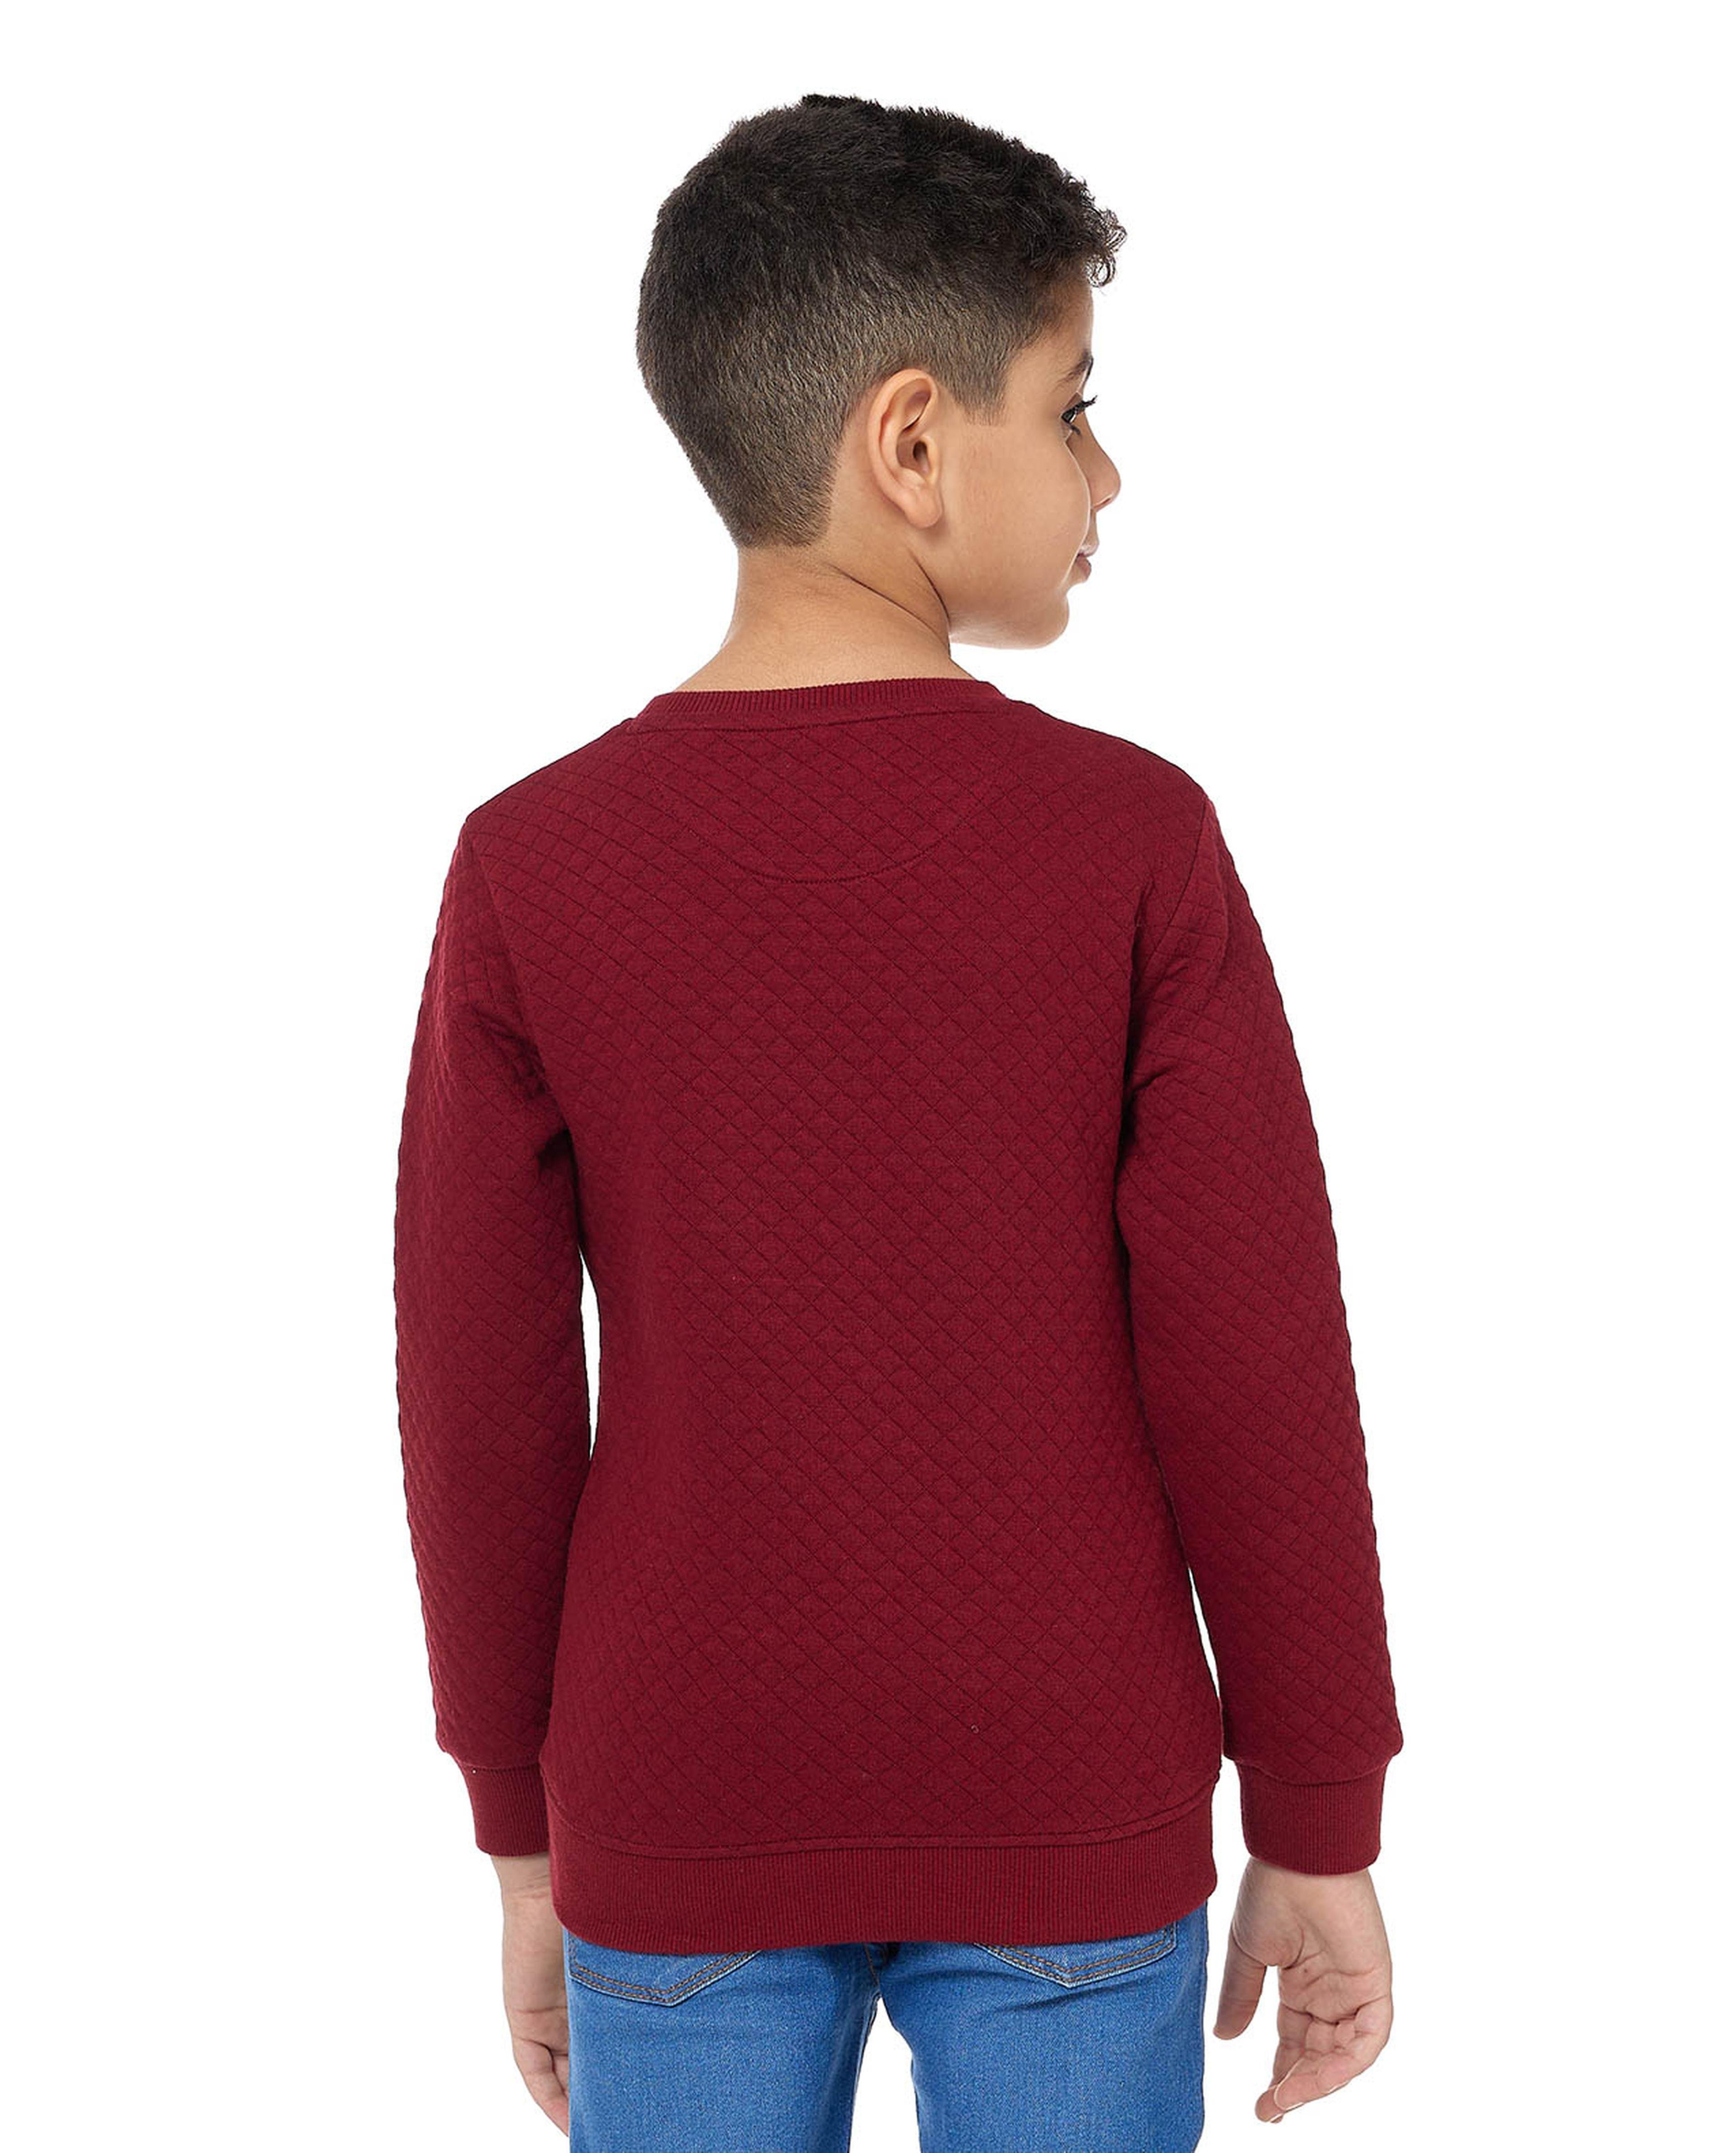 Quilted Sweatshirt with Crew Neck and Long Sleeves